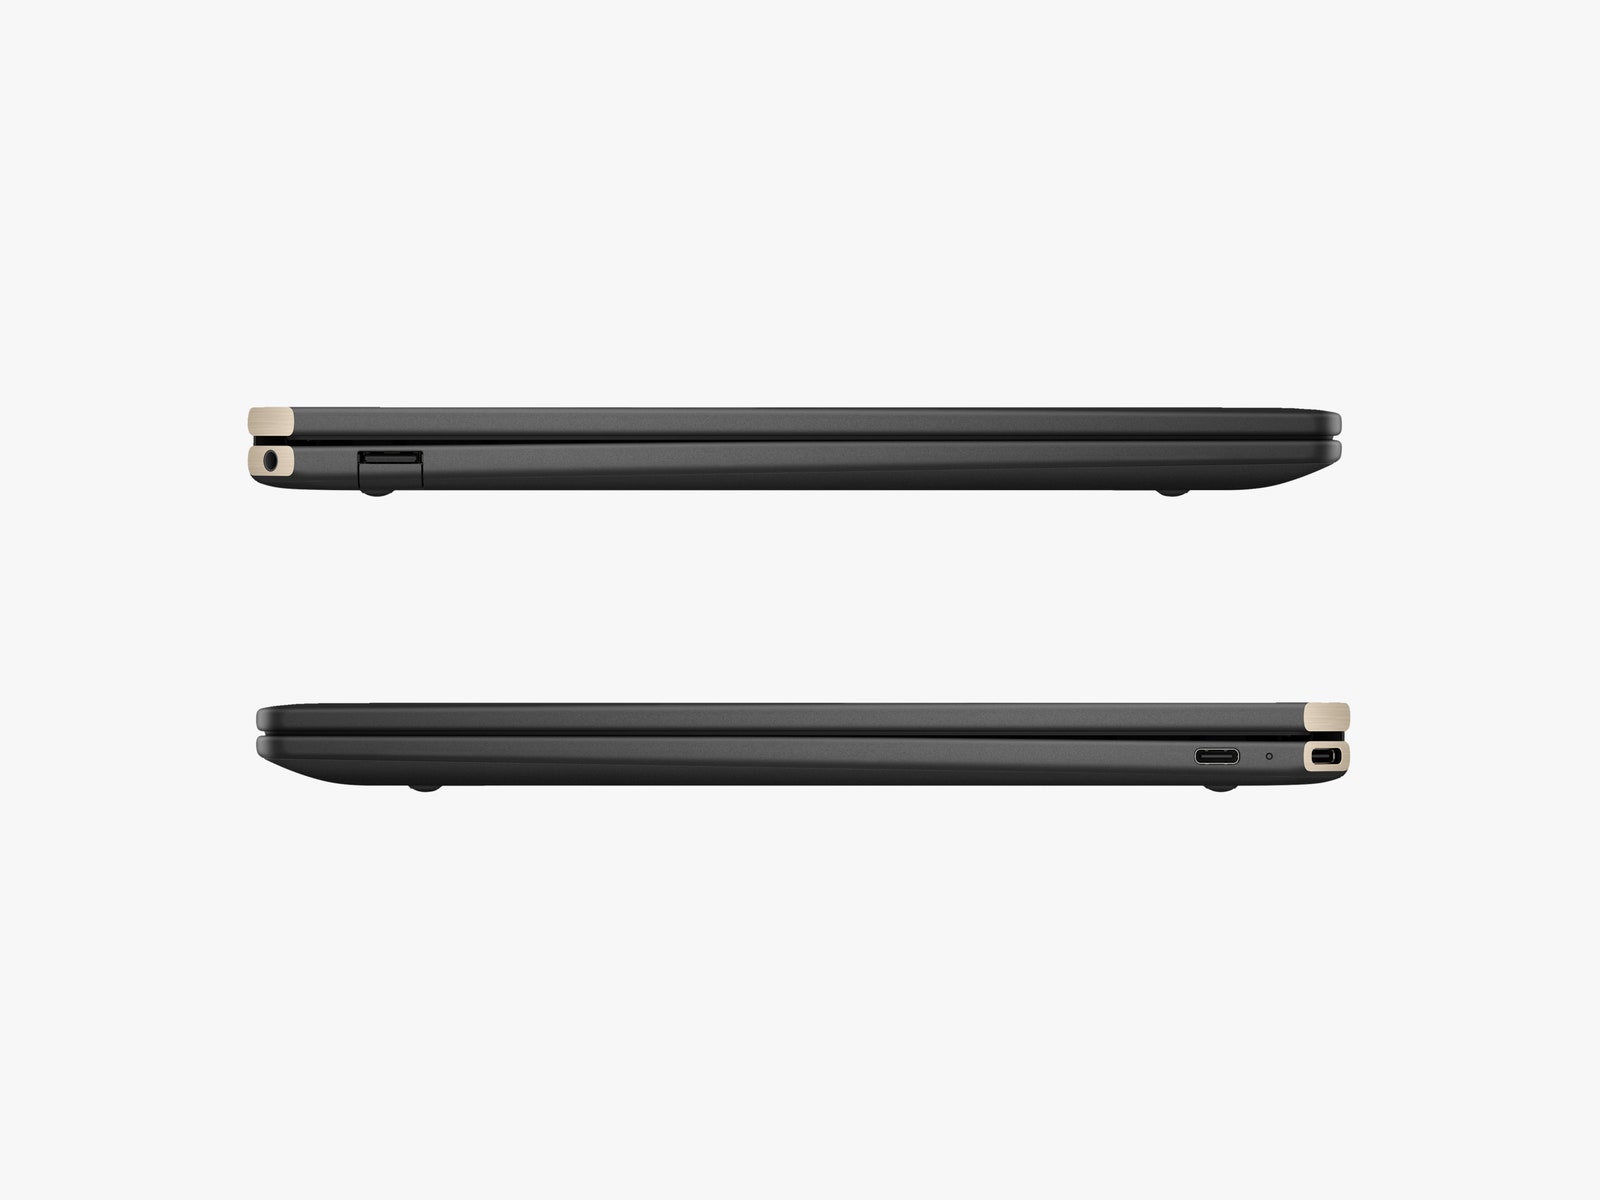 2 side views of a thin black laptop in closed position